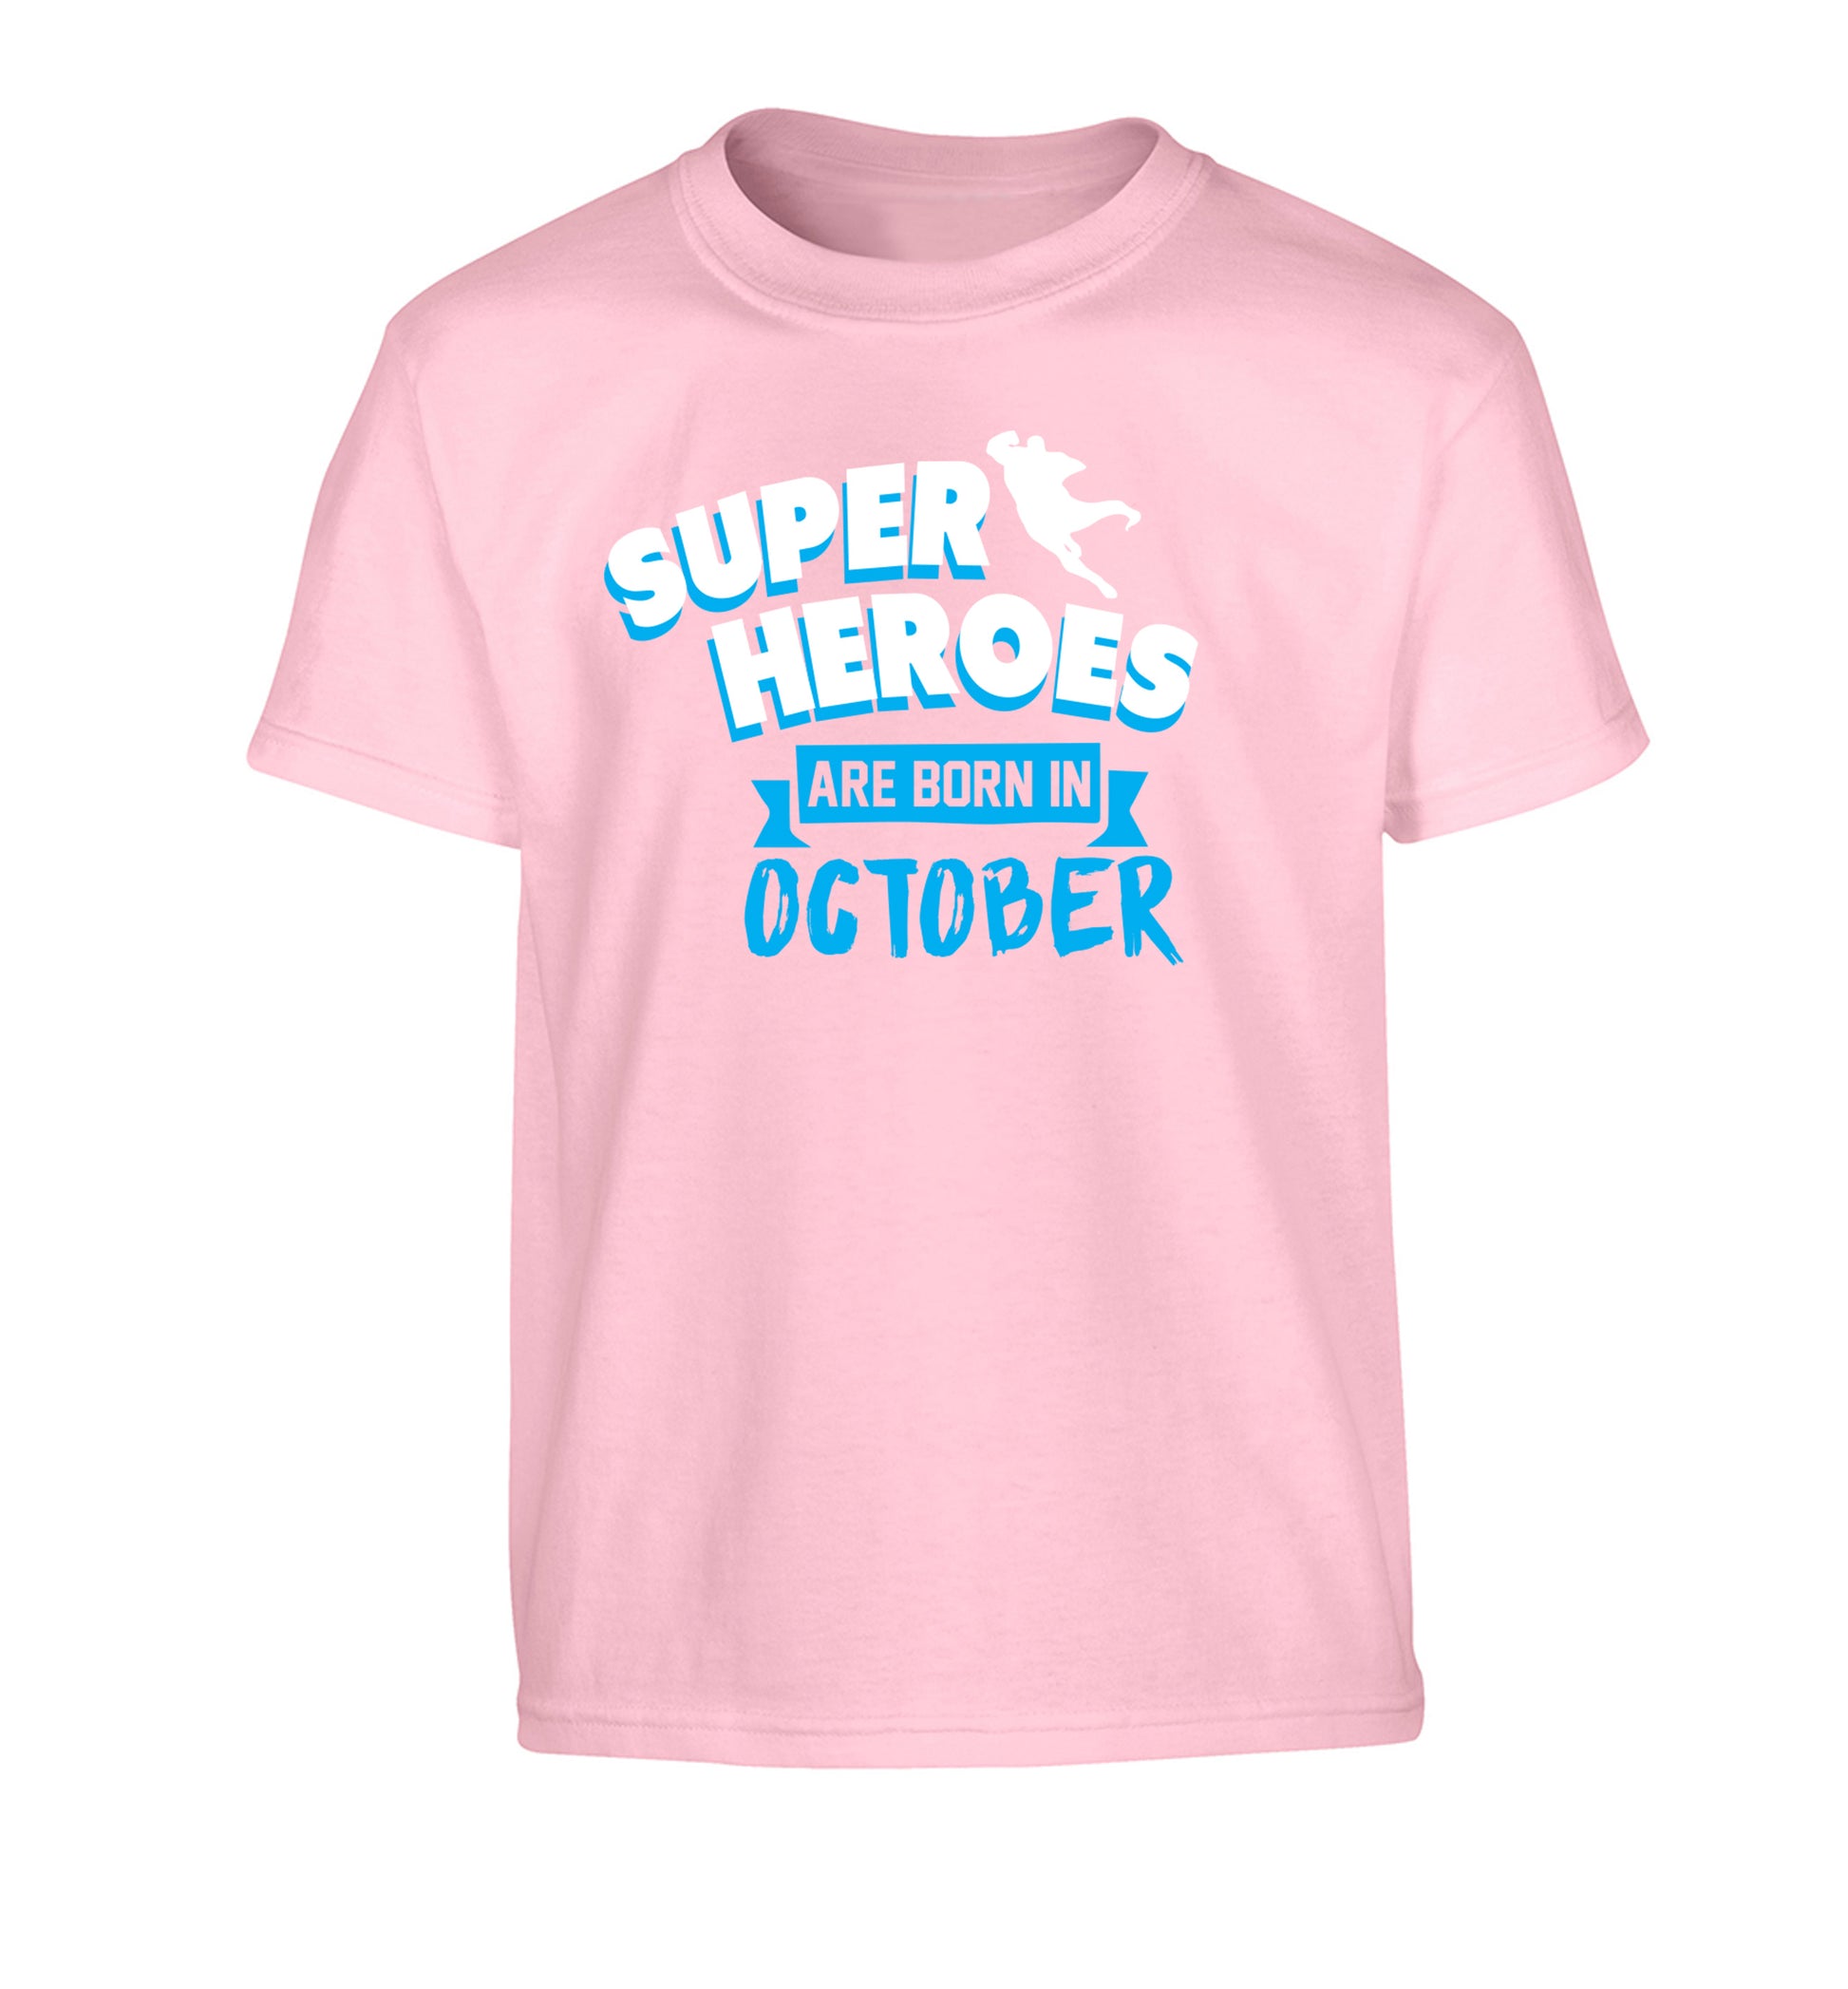 Superheroes are born in October Children's light pink Tshirt 12-13 Years